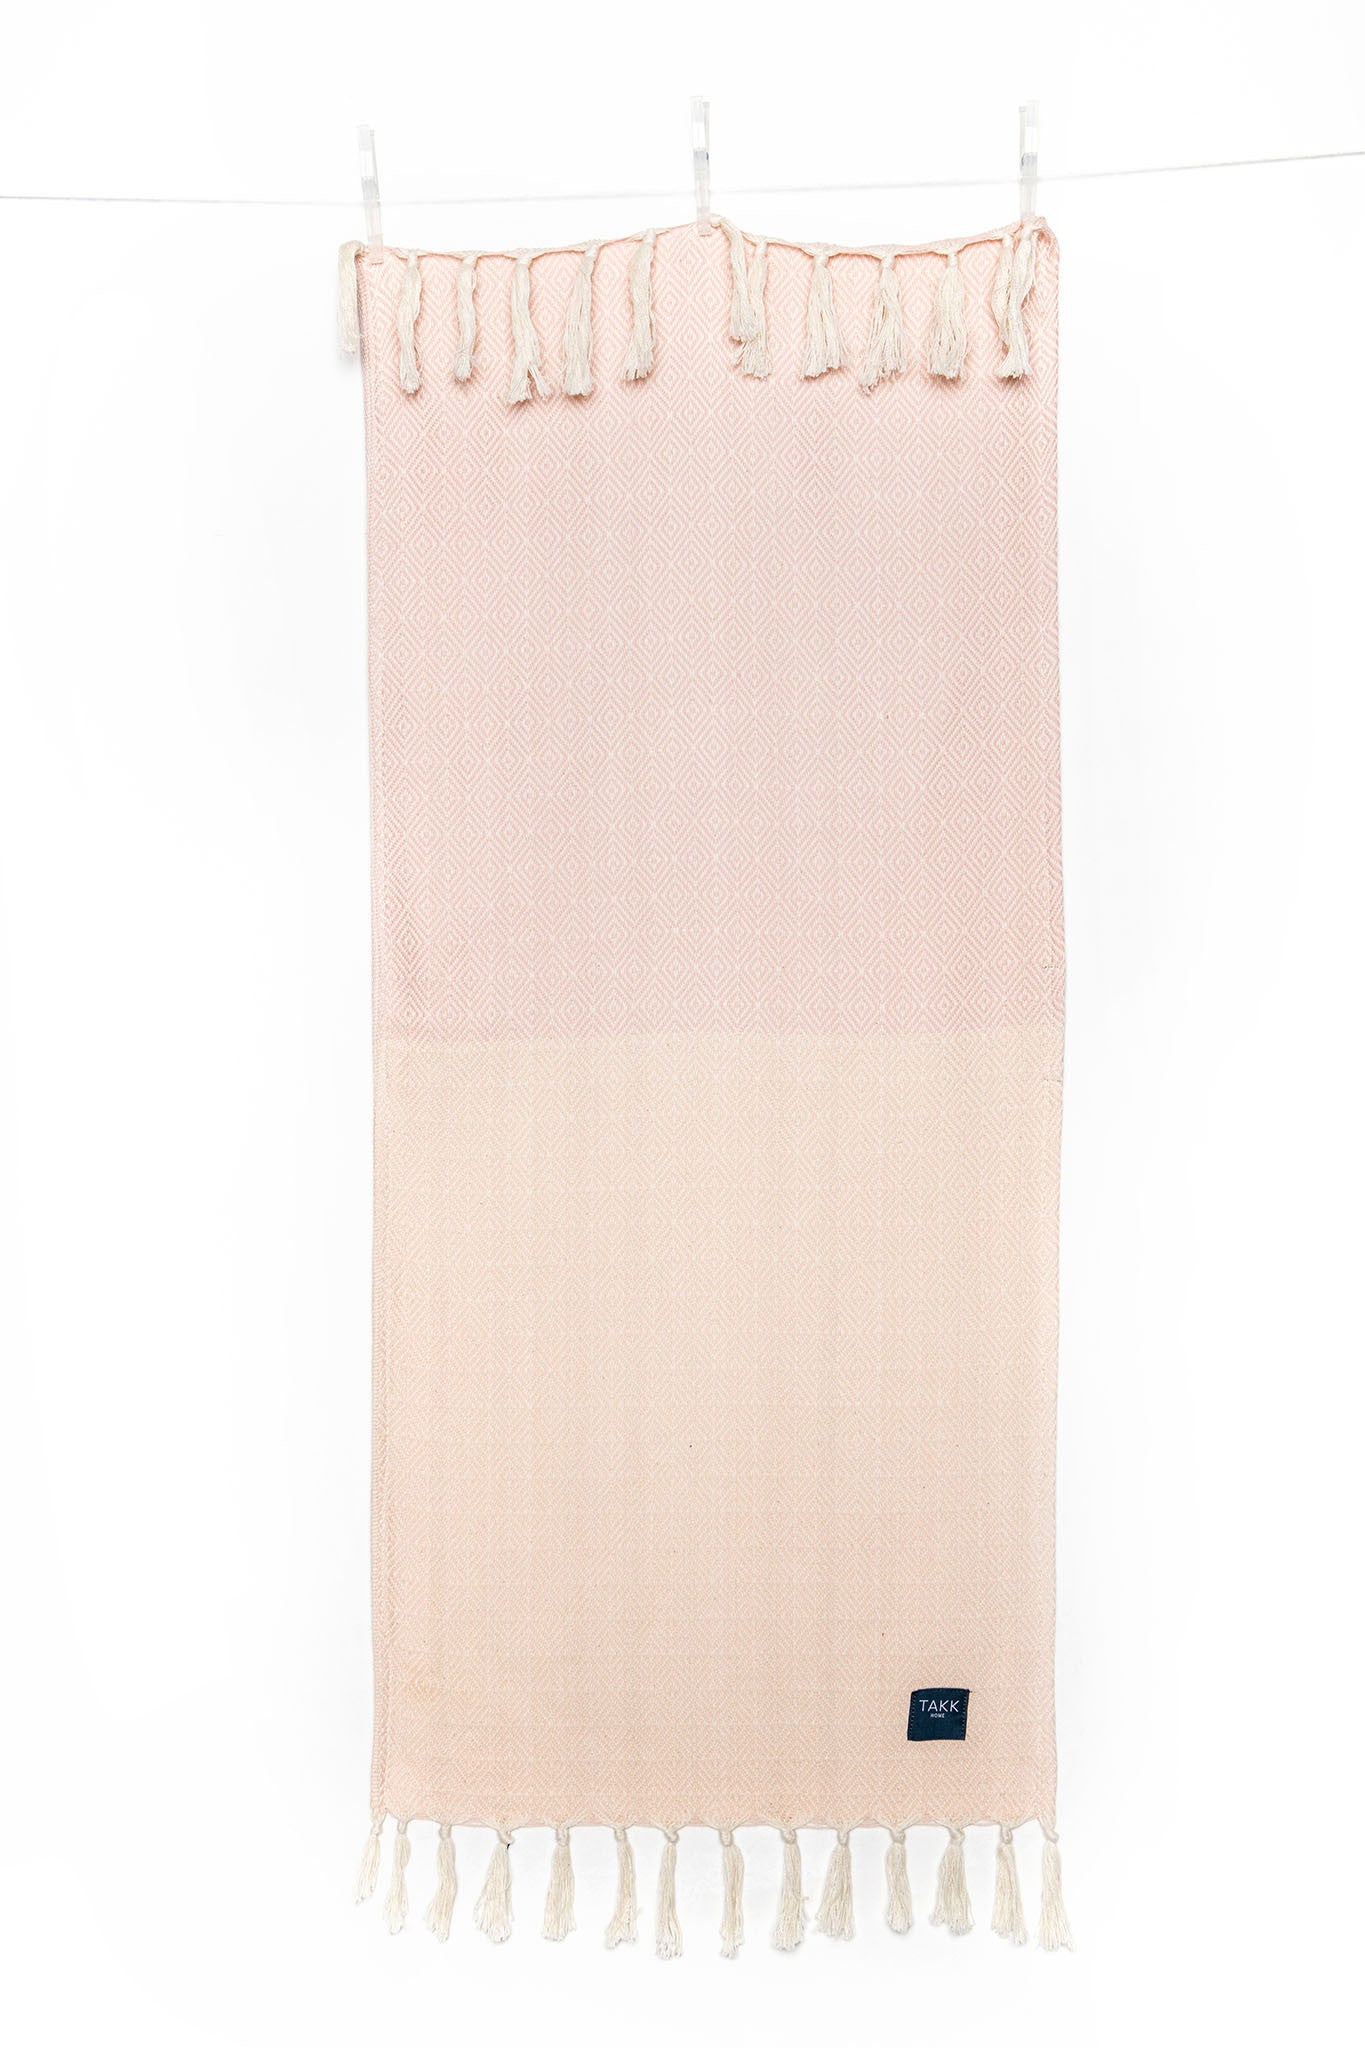 Luxurious hand towel. Perfect for everyday use and makes a stylish addition to your kitchen and bathroom. Soft, absorbent, light weight, quick drying, aesthetically pleasing, takes up little space. STANDARD 100 by OEKO-TEX®, eco-friendly certification. 100% quality cotton. Pink